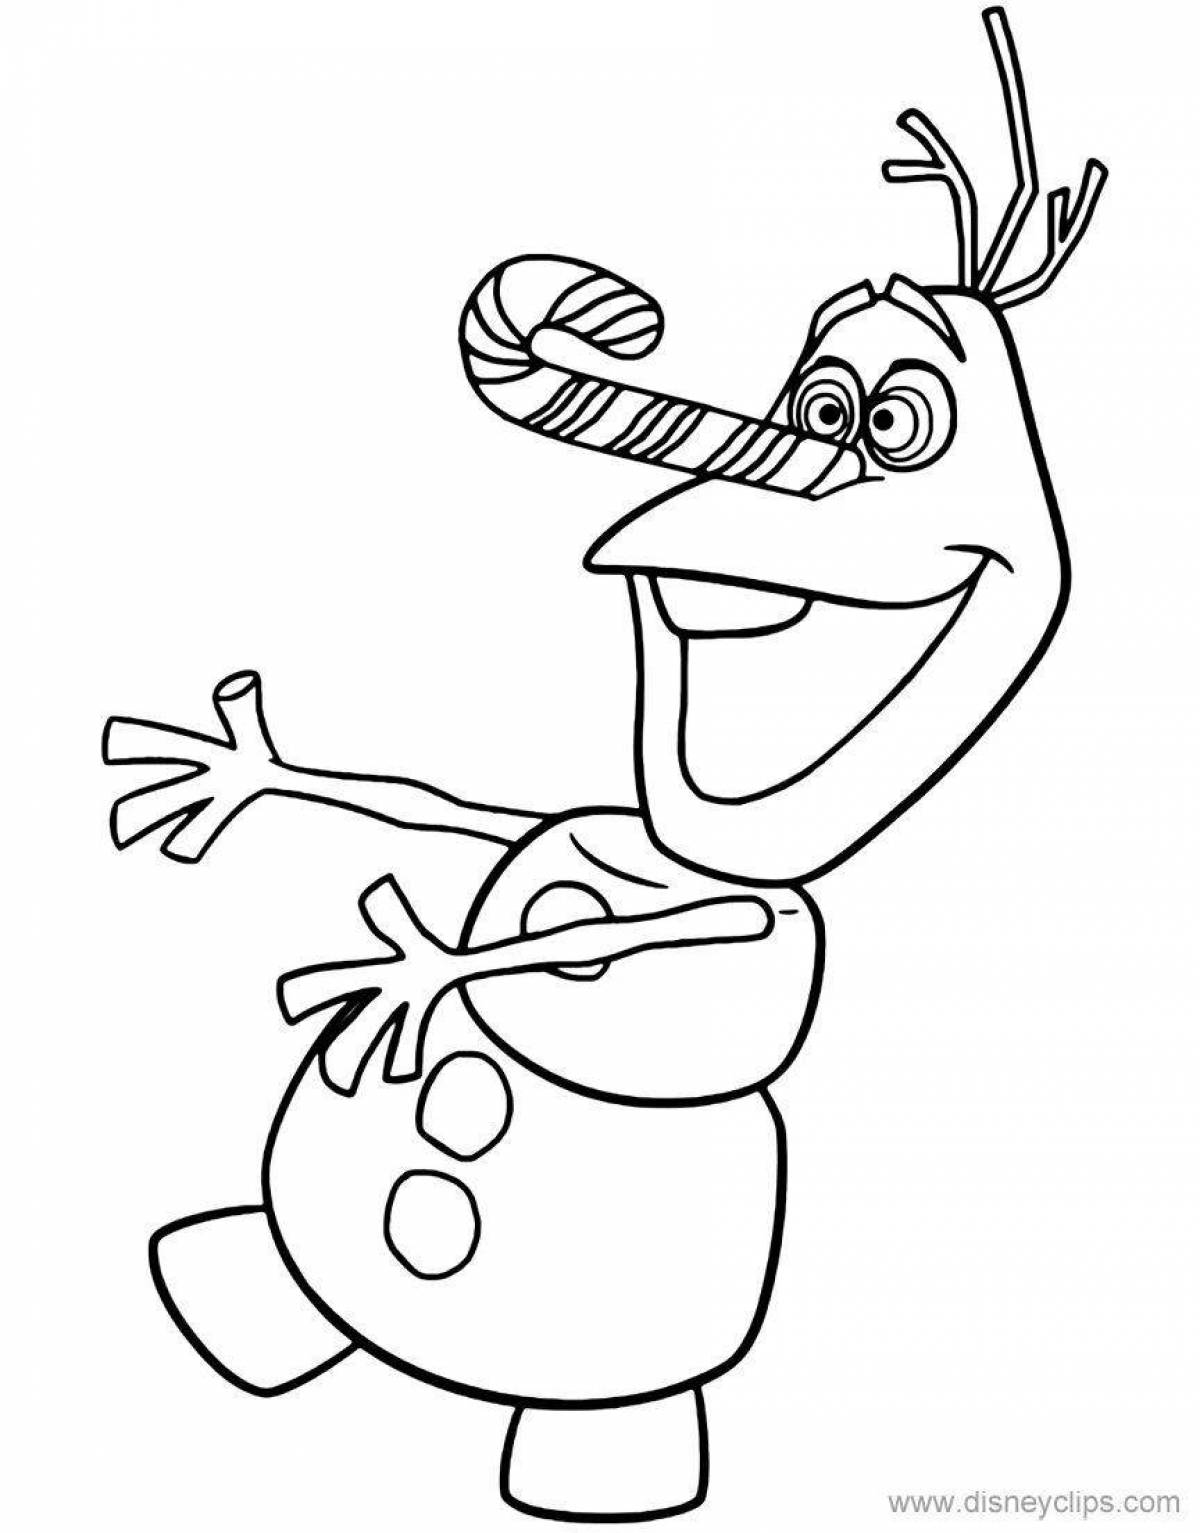 Olaf's cold heart refreshing coloring book